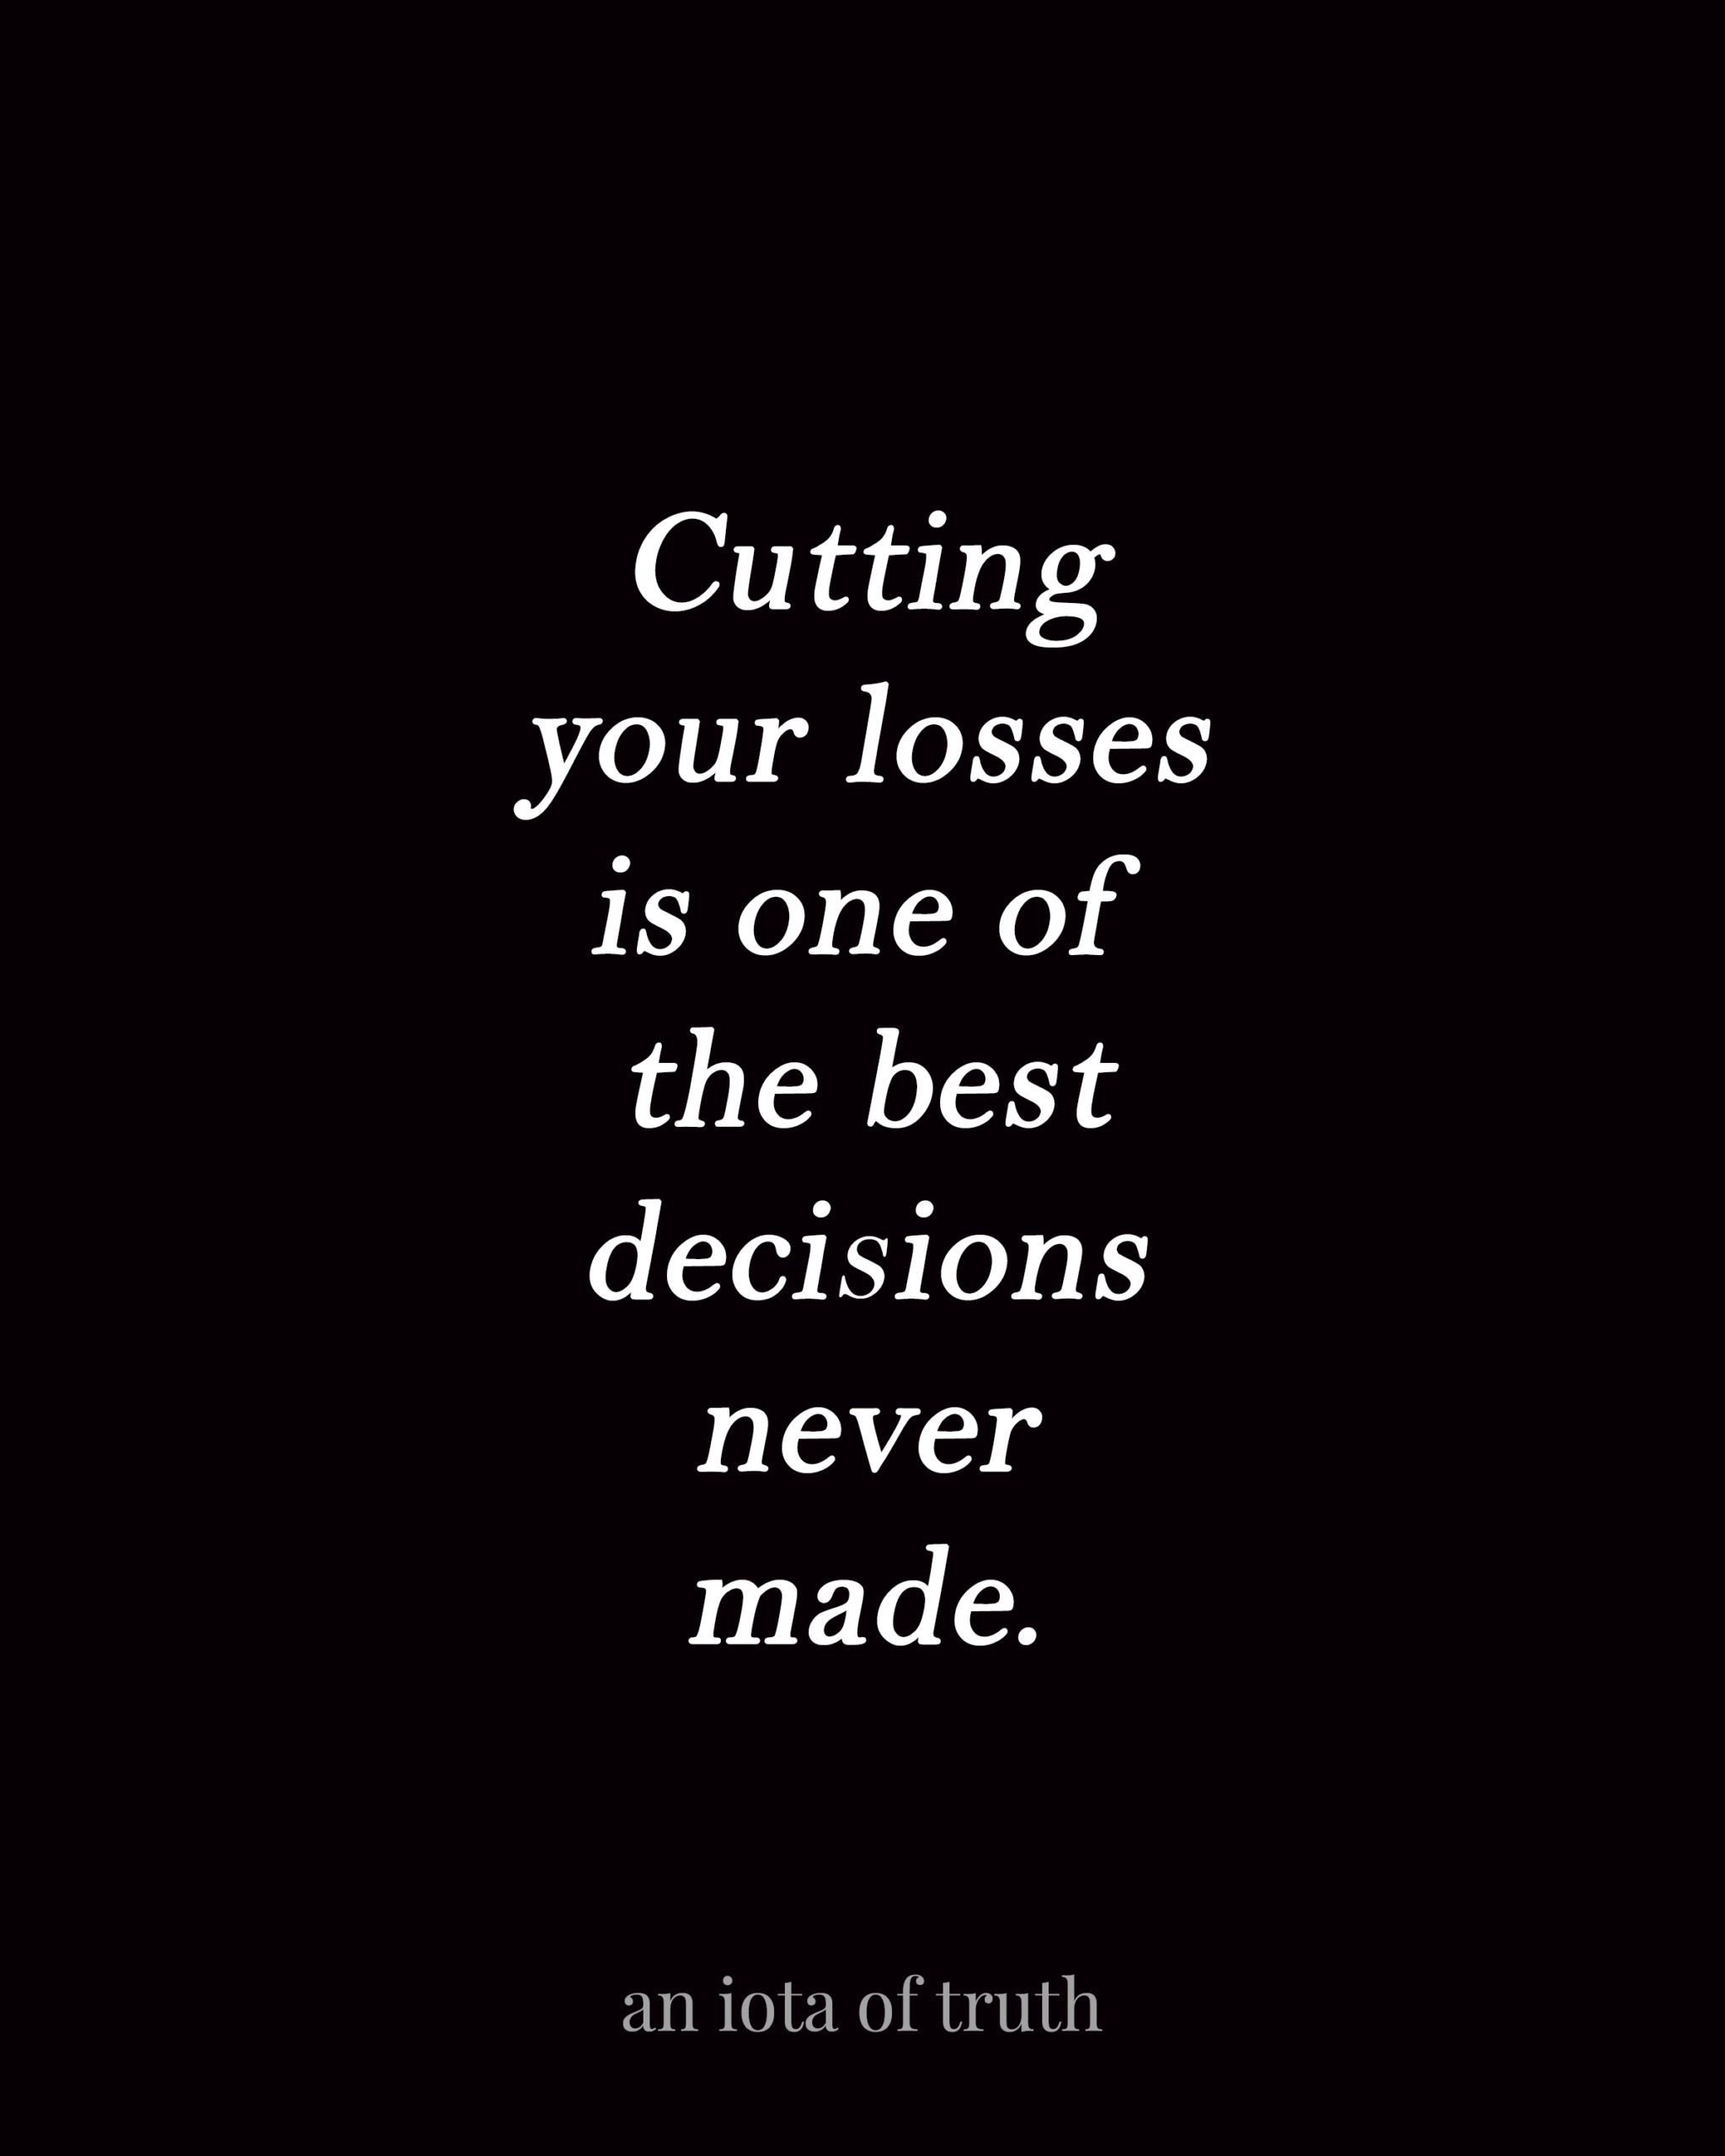 Cutting your losses is one of the best decisions never made.